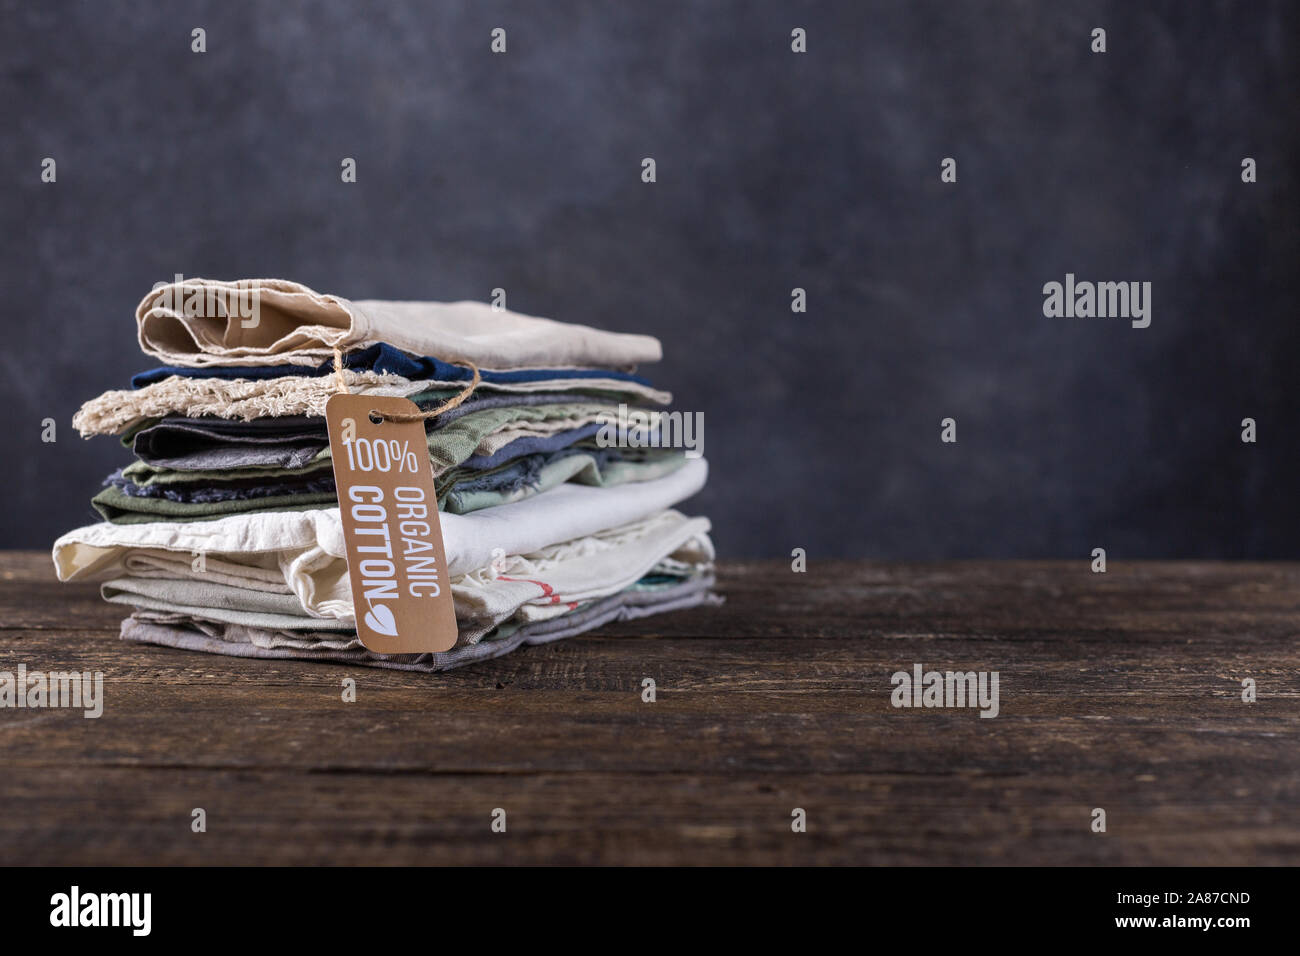 Pile of things lie on a wooden table. Cotton, linen items in pastel colors shirts, shreds of fabric, shawls. Stock Photo